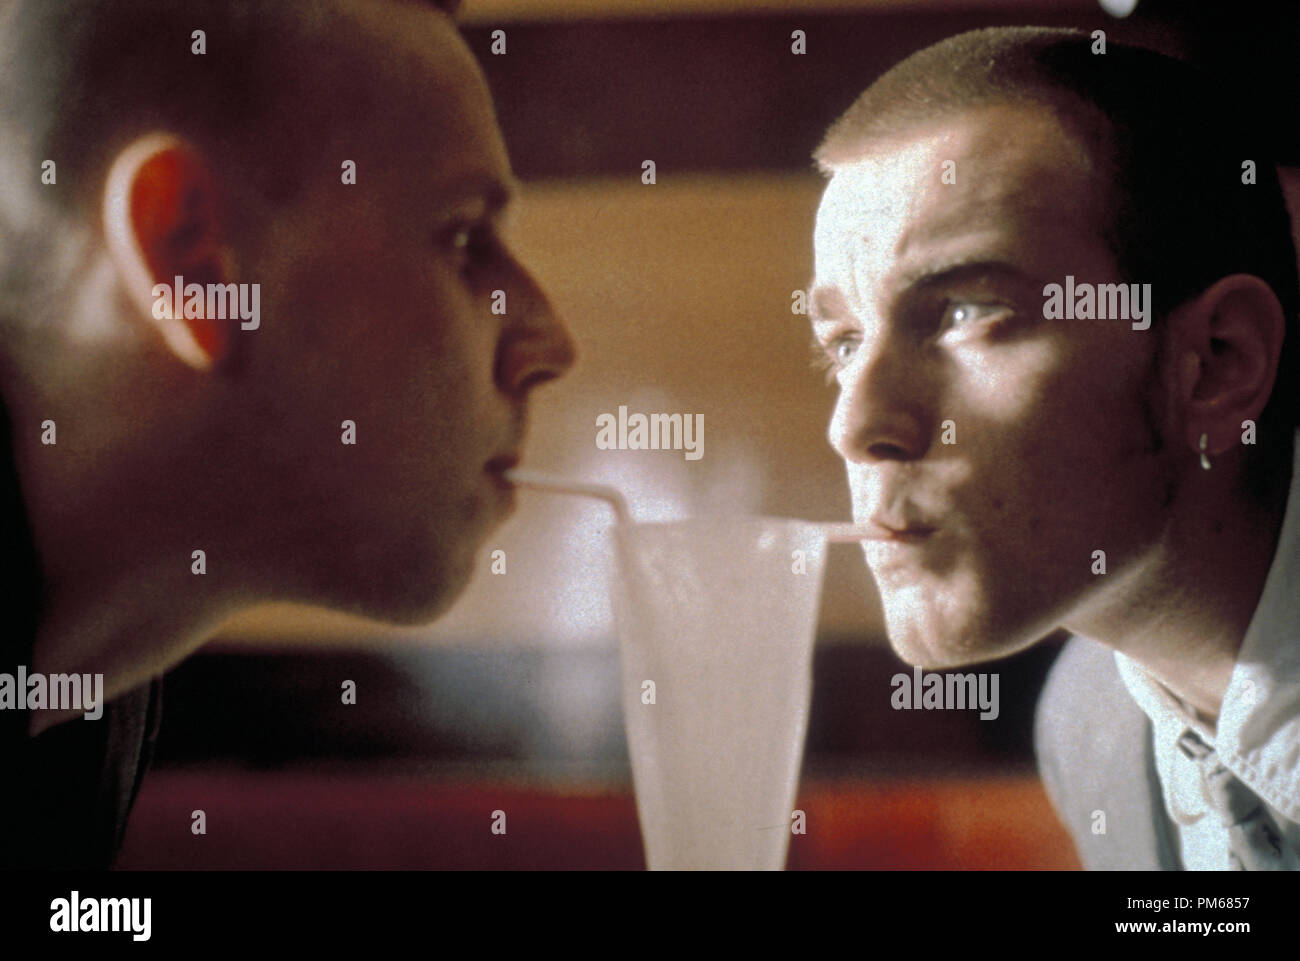 Film Still from 'Trainspotting' Ewen Bremner, Ewan McGregor 1996 © 1996 Miramax Photo Credit: Liam Longman  File Reference # 31042066THA  For Editorial Use Only - All Rights Reserved Stock Photo